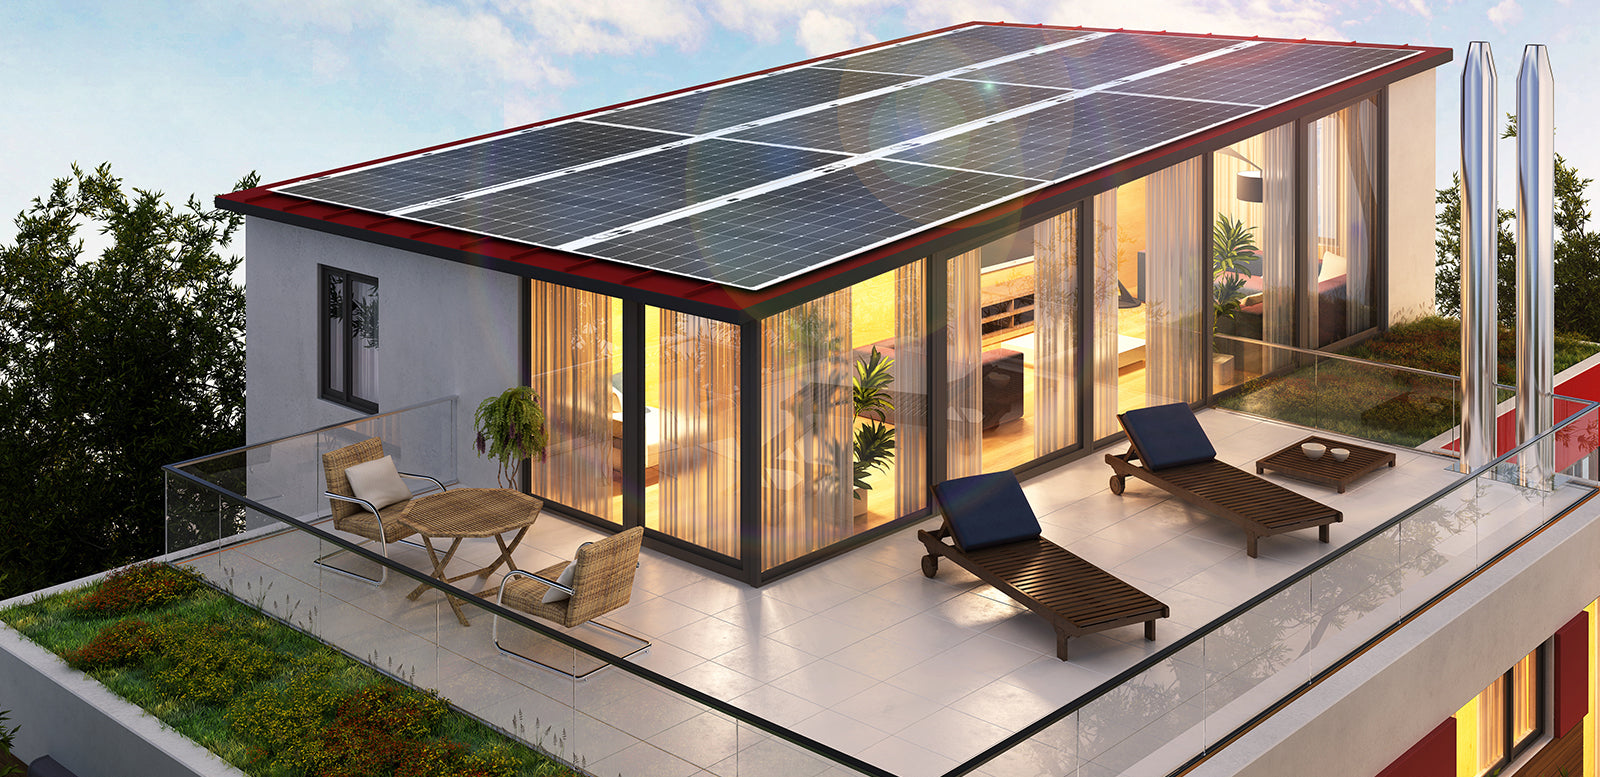 How about solar panels? Is it worth purchasing?